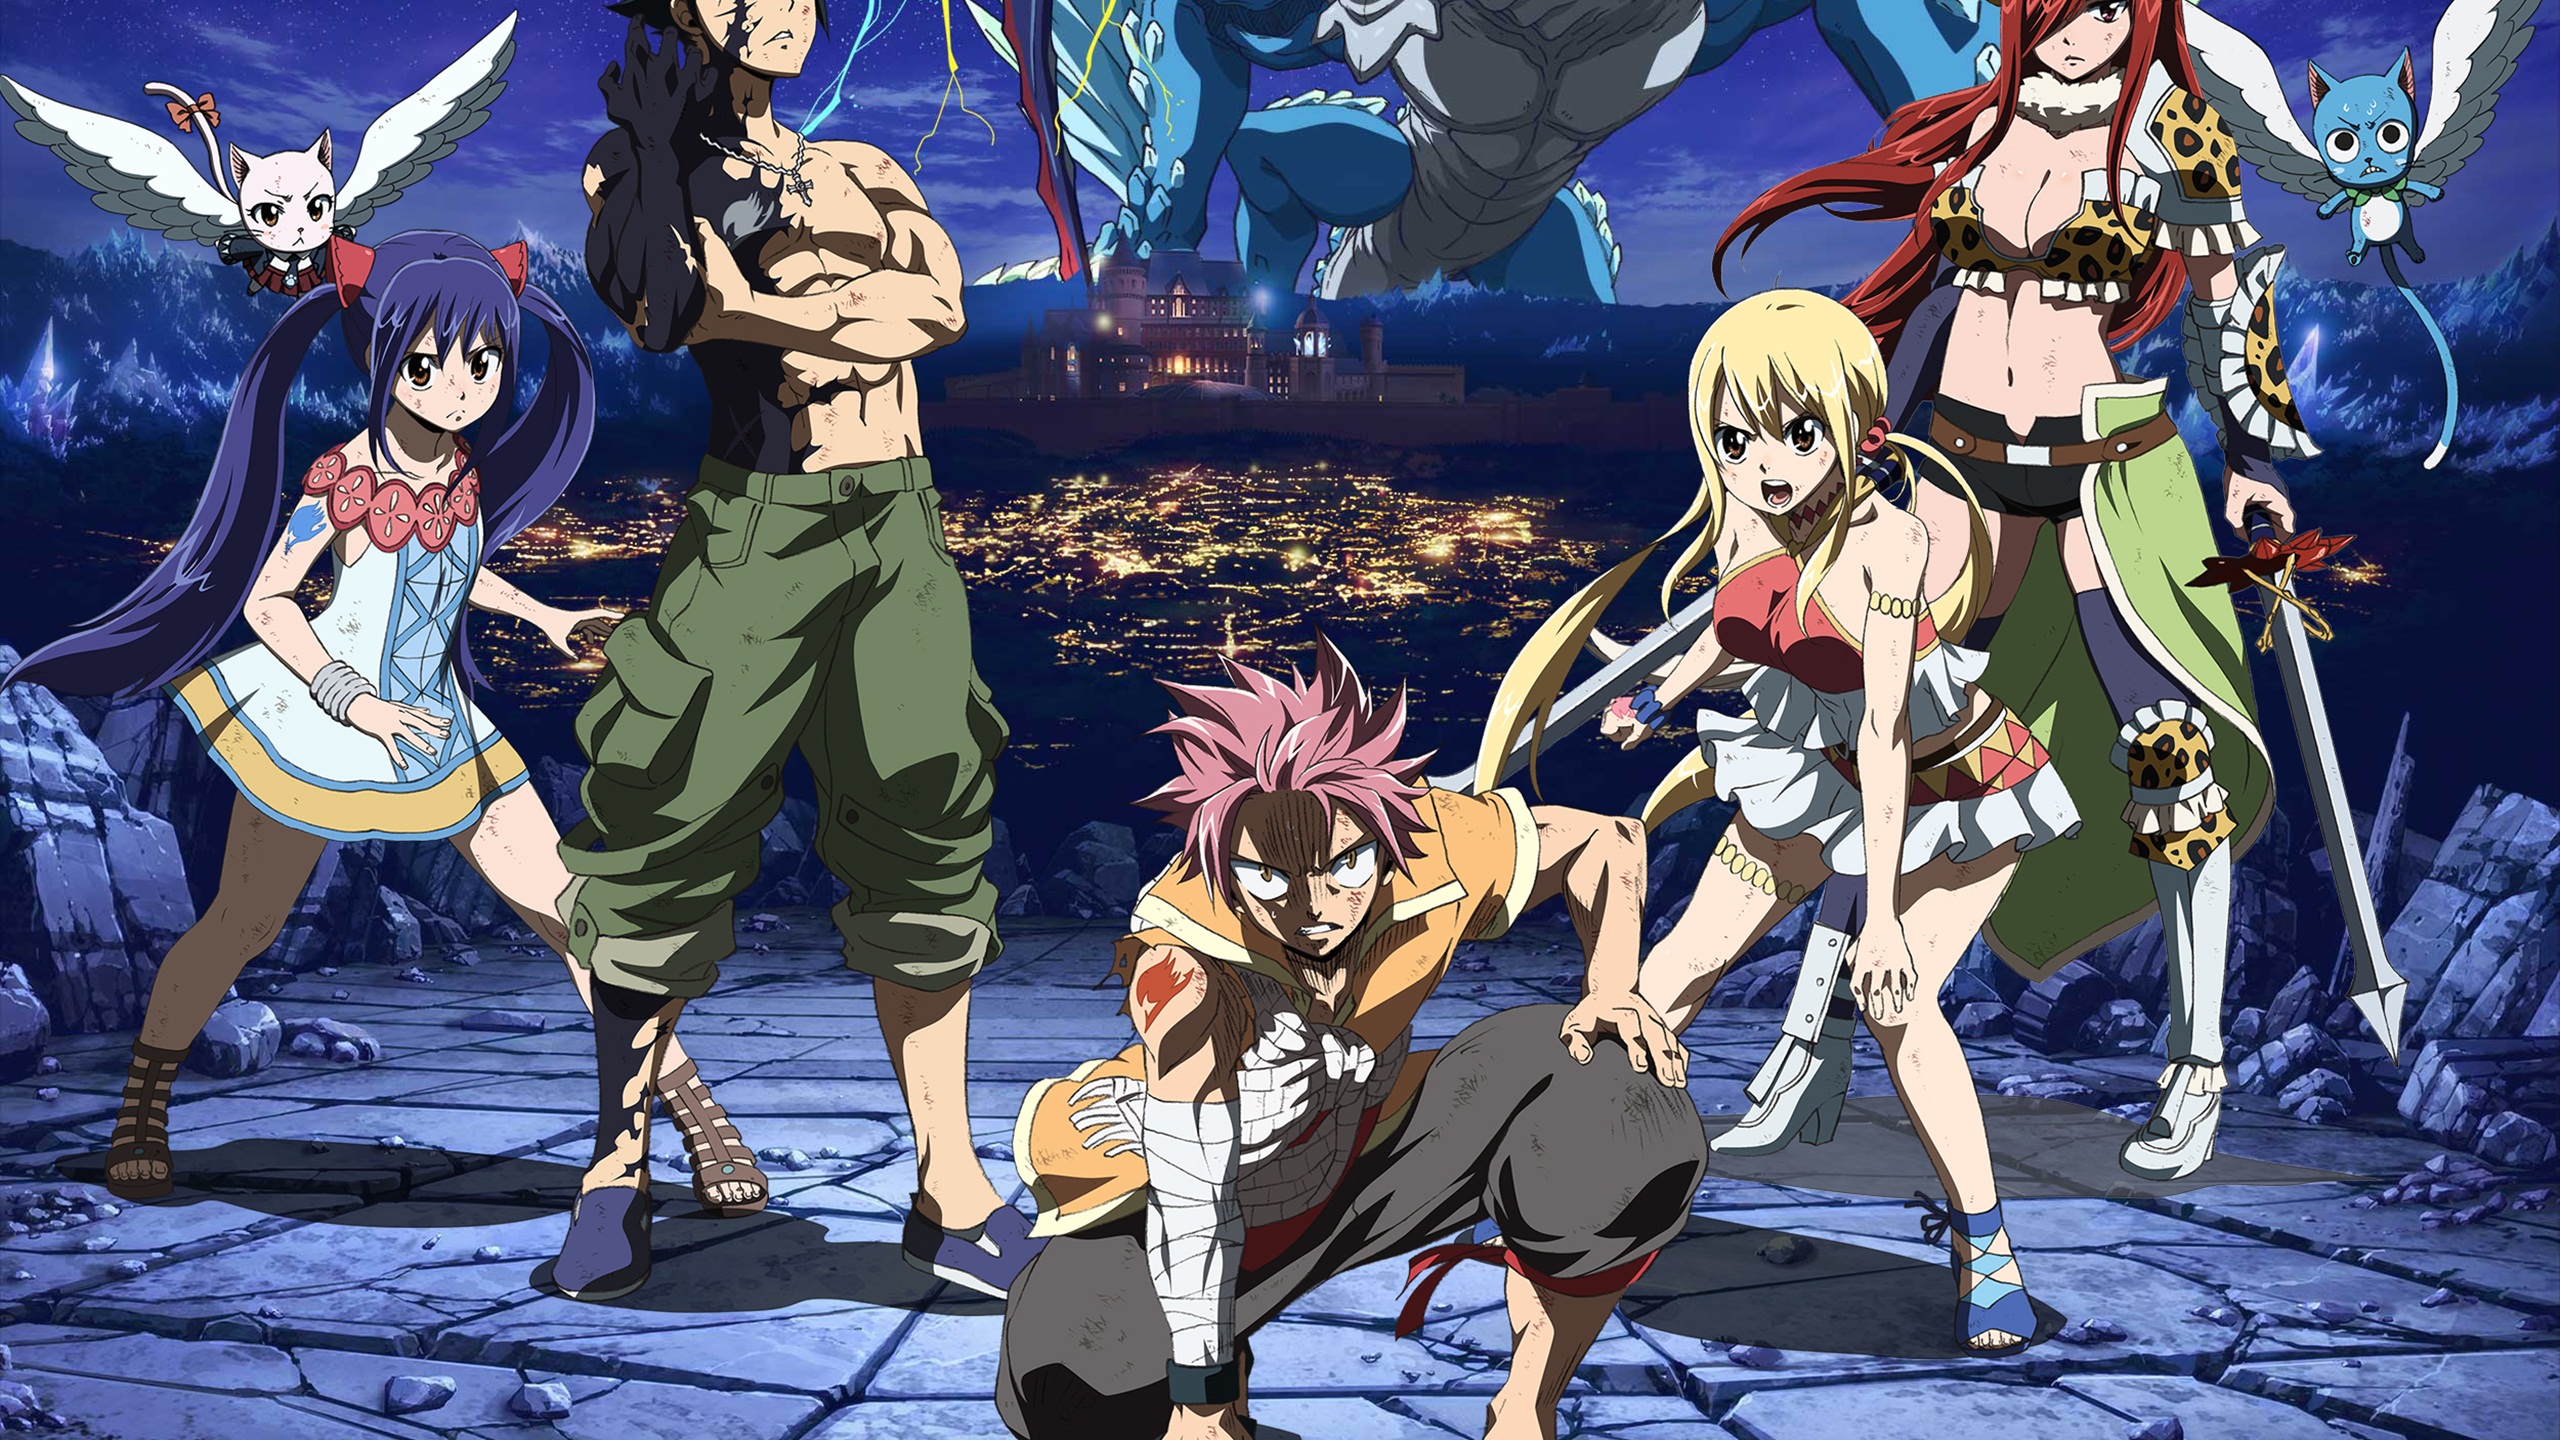 Anime Fairy Tail HD Wallpapers For Desktop - Wallpaper Cave